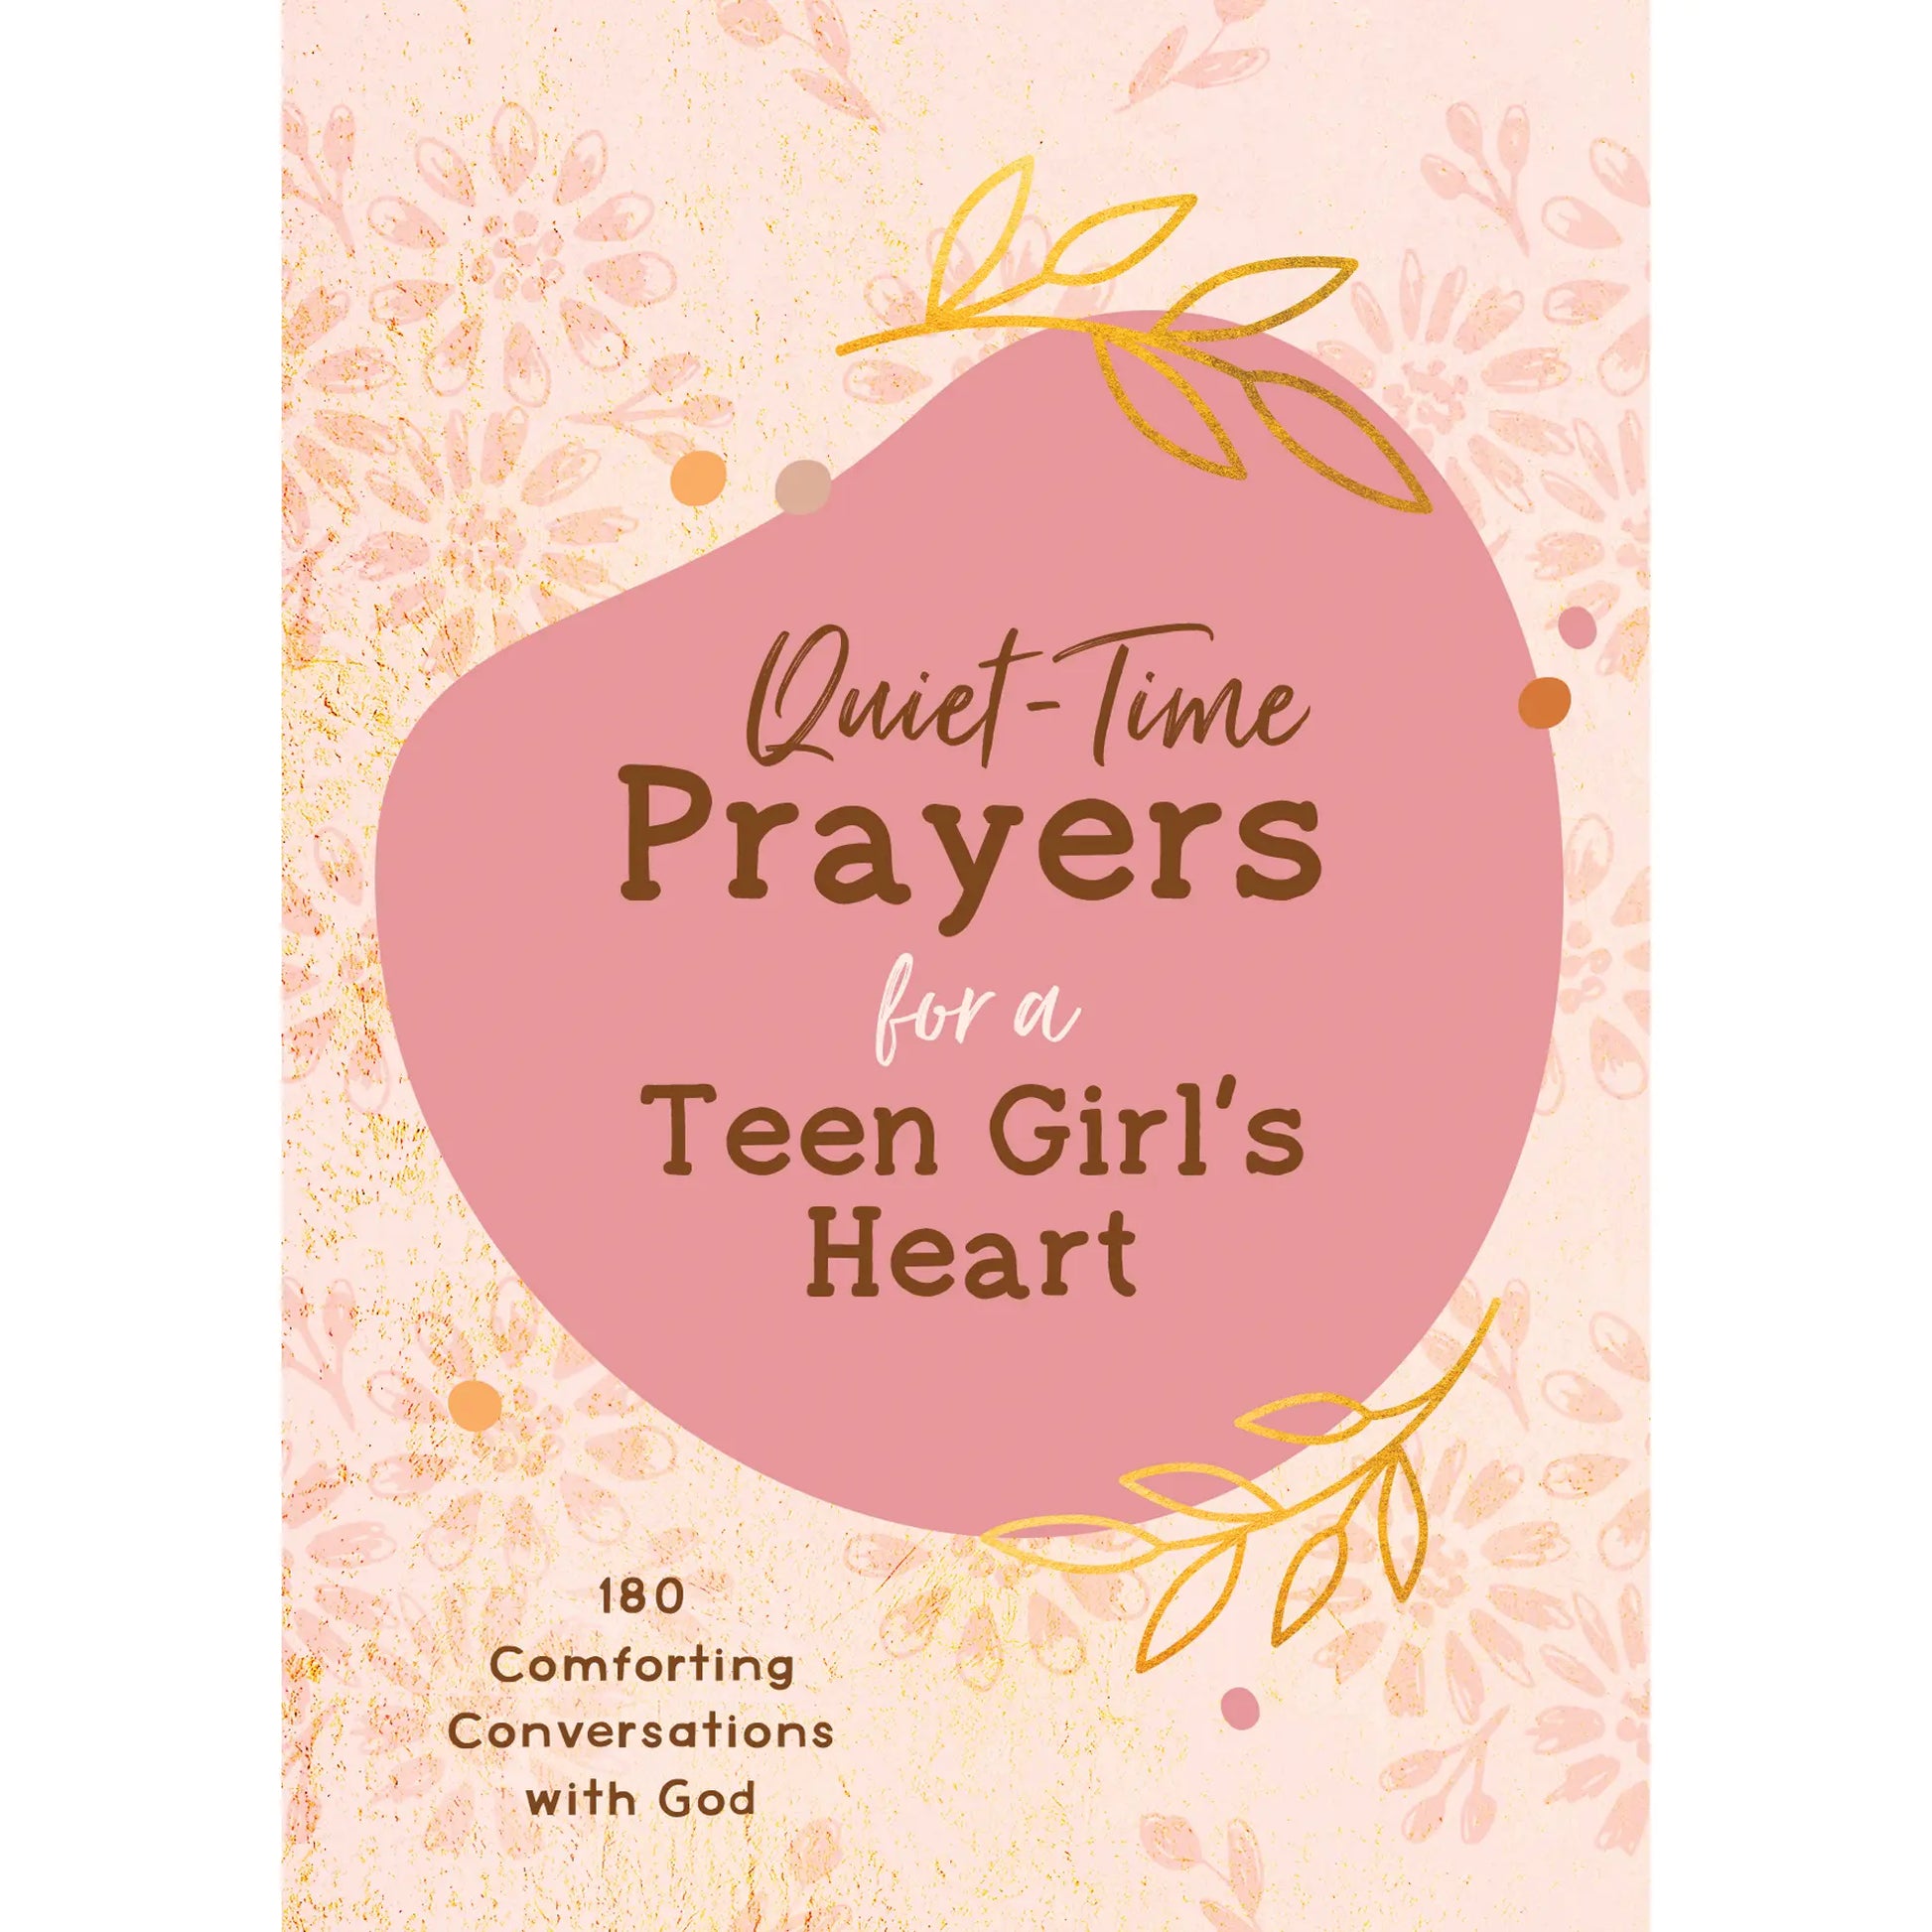 Quiet Time Prayers for a Teen Girl's Heart  - Doodlebug's Children's Boutique